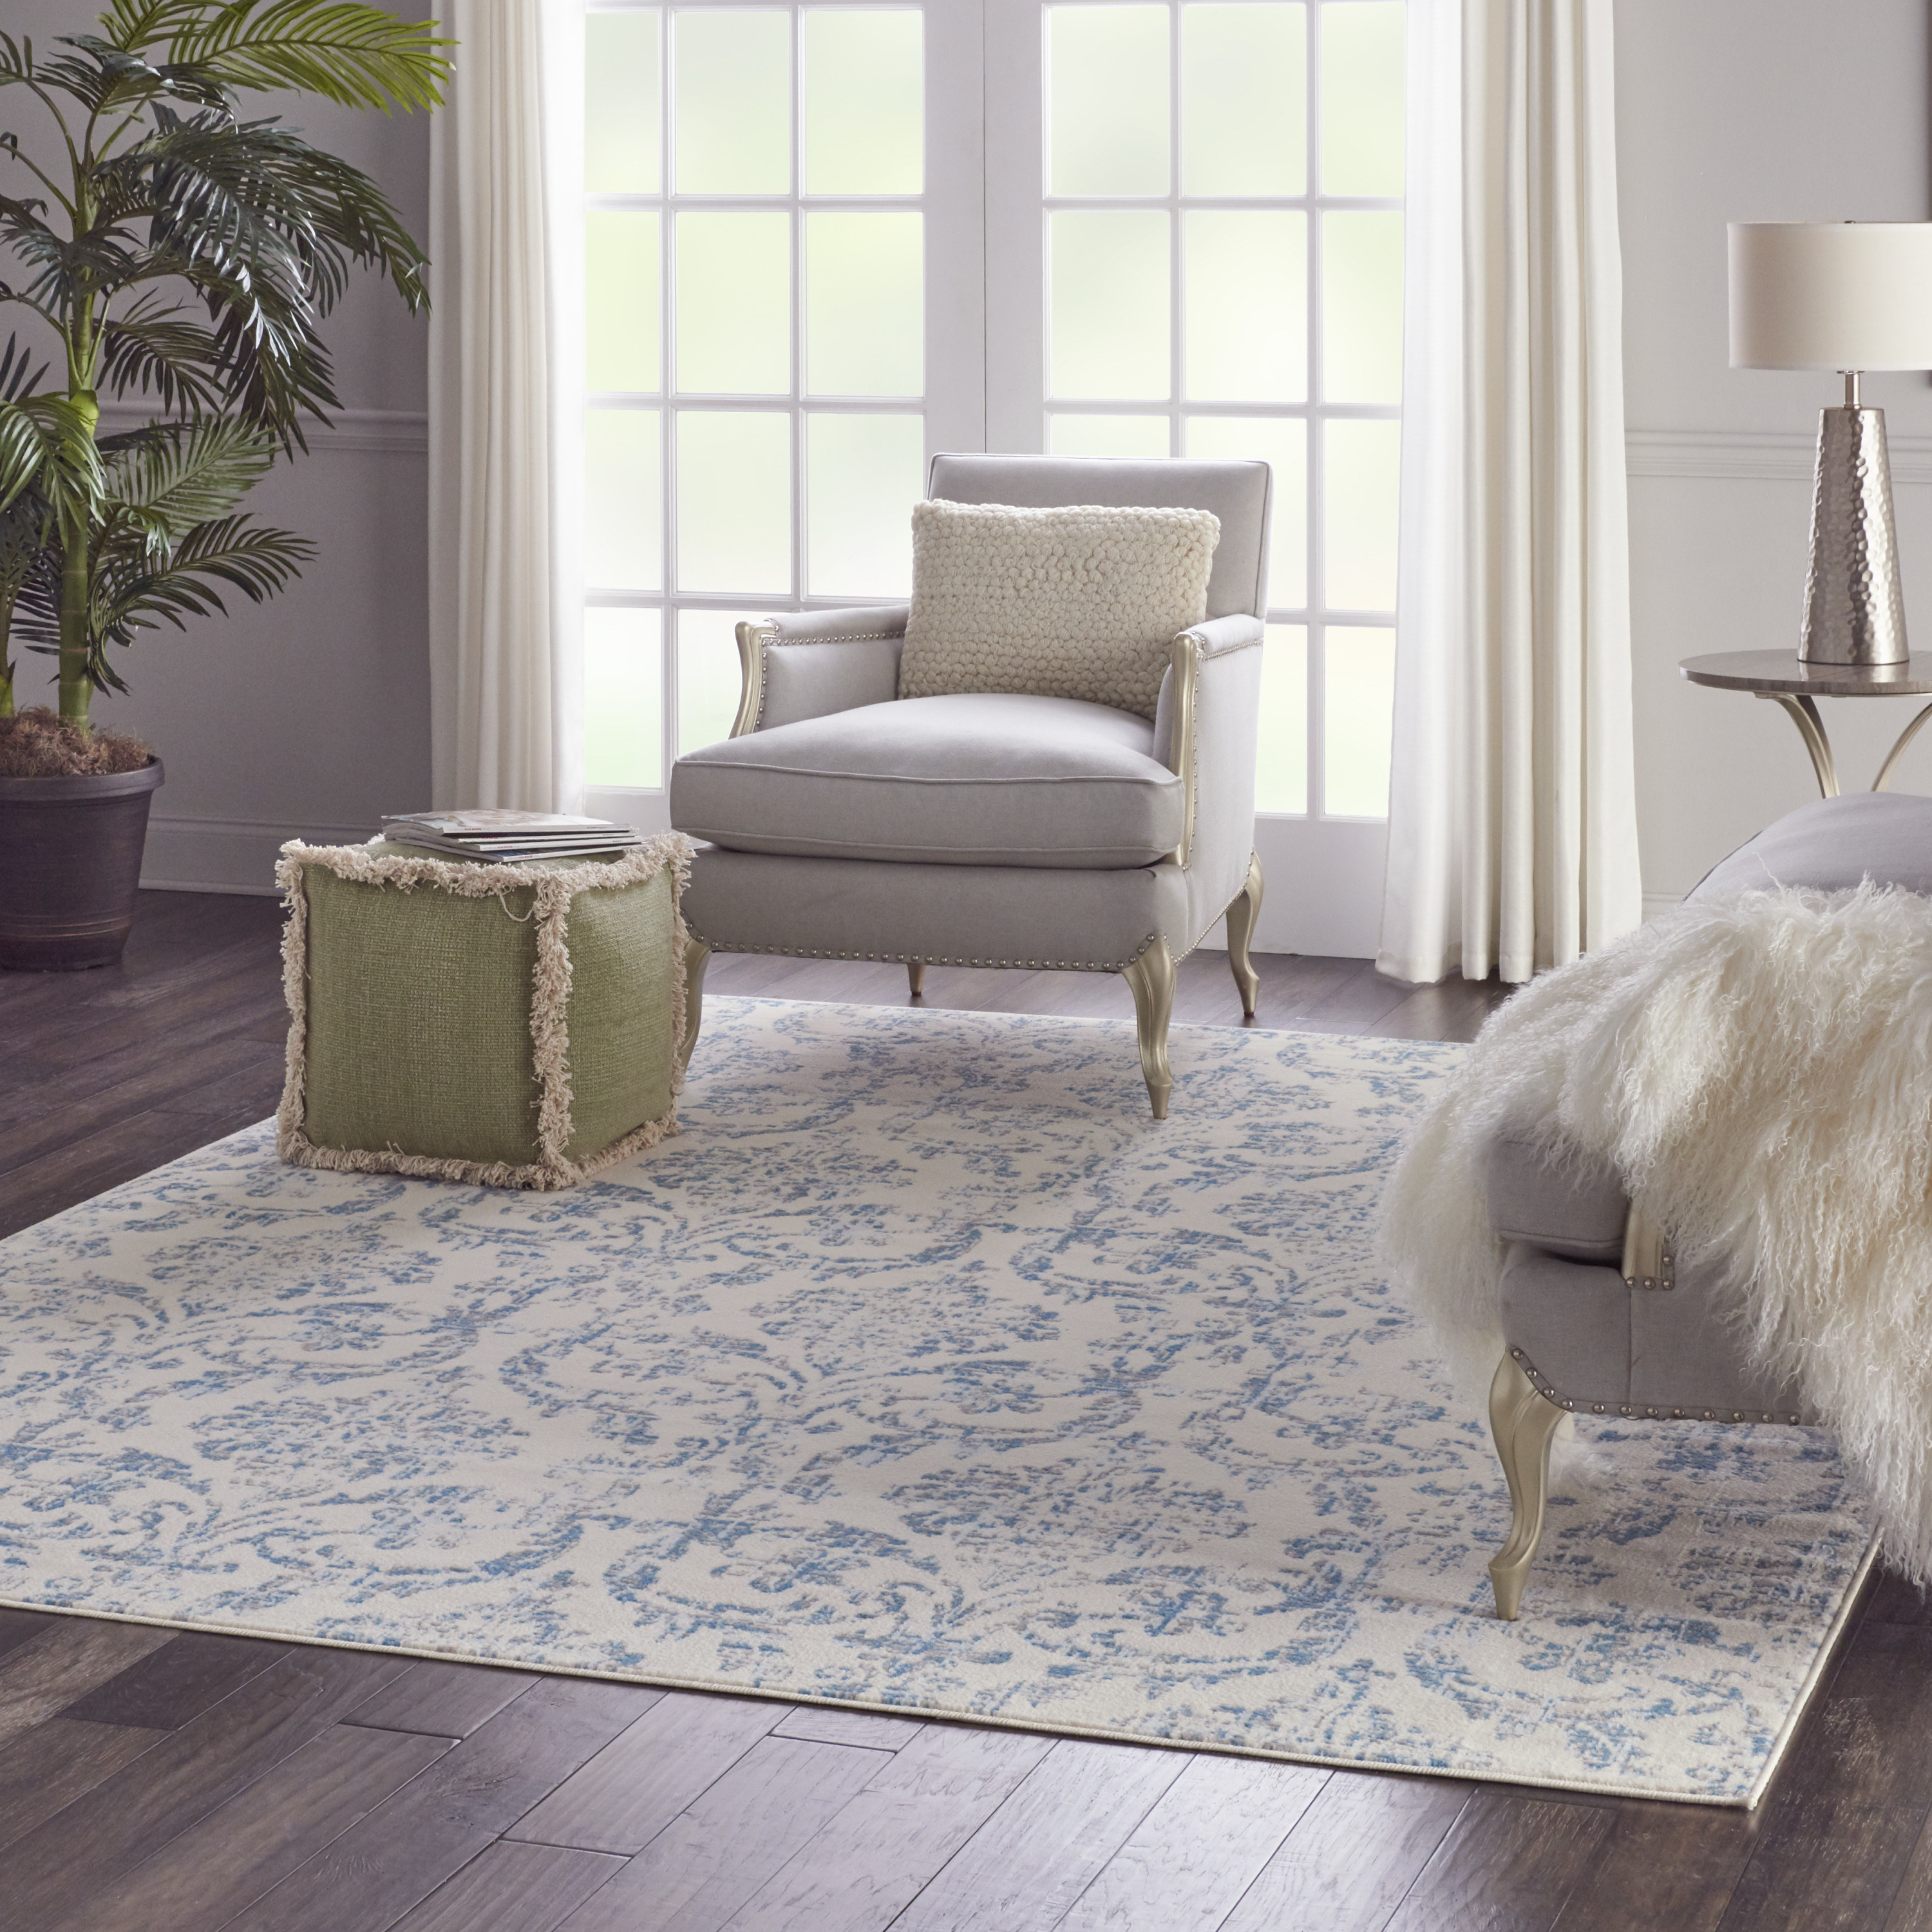 a blue and white rug in a living room setting